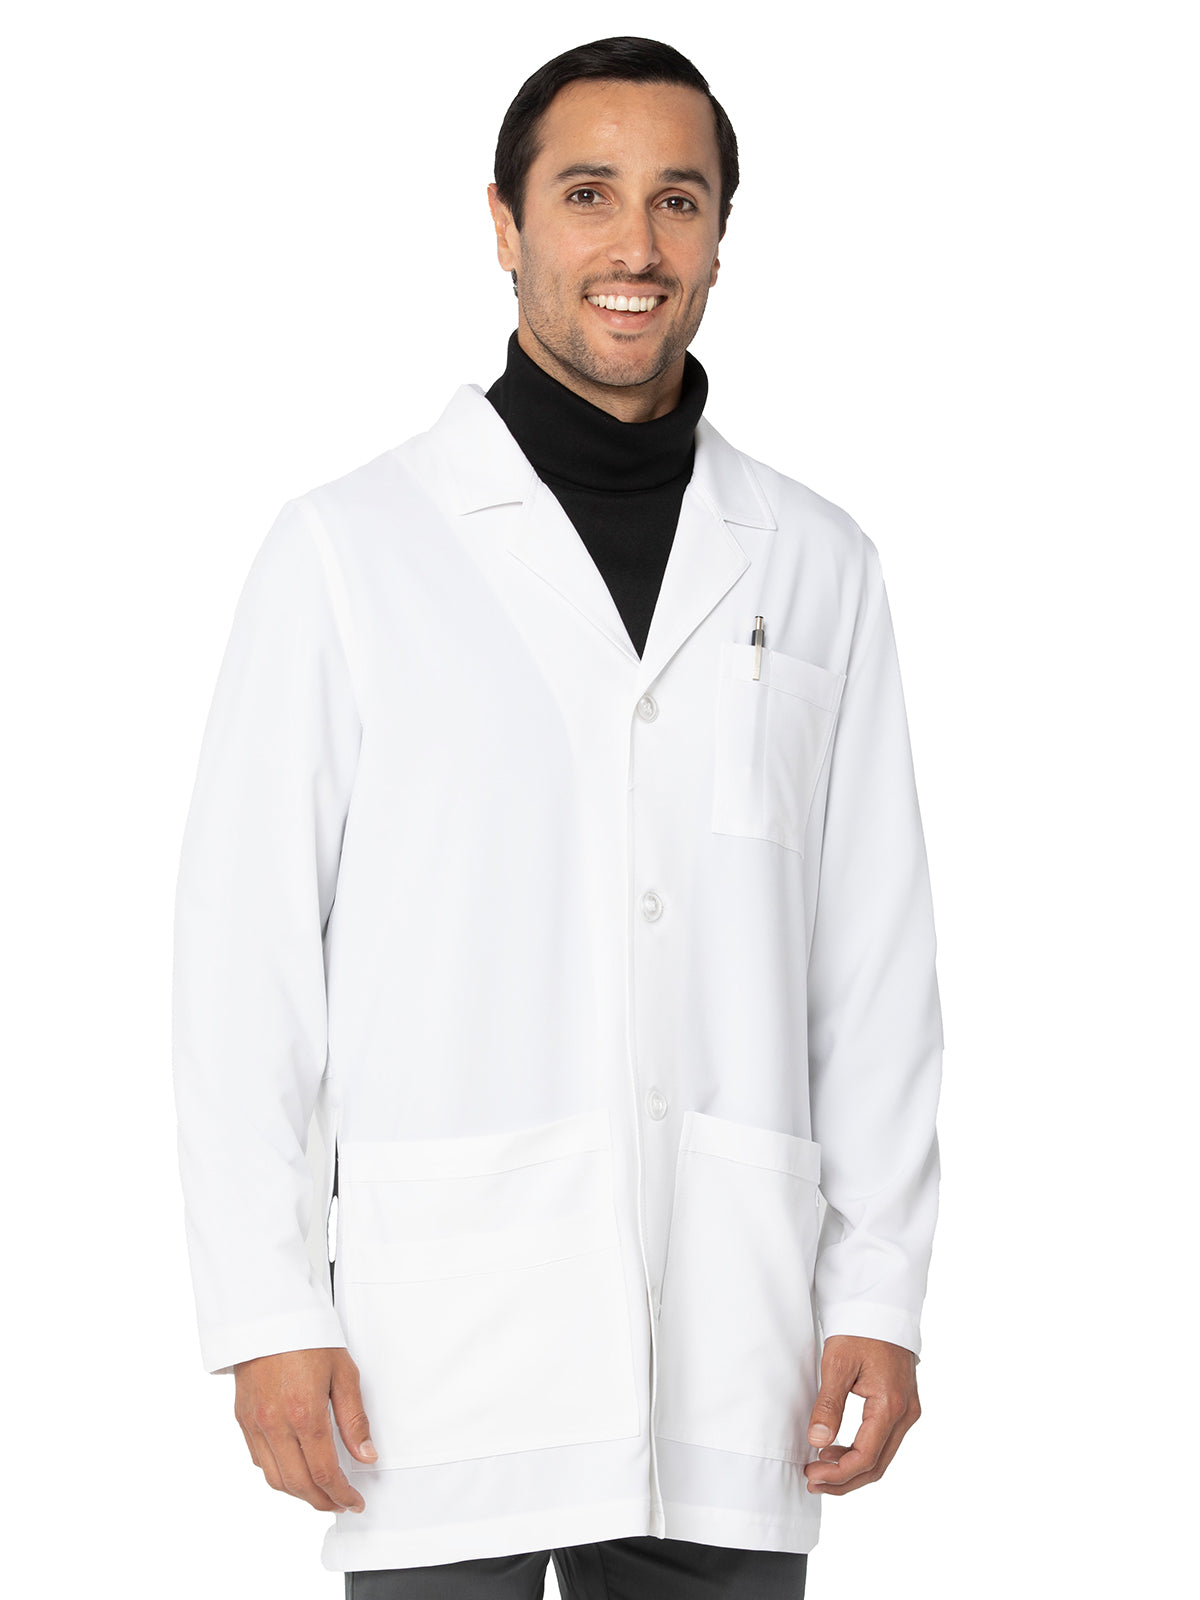 ProFlex Tailored Fit Stretch 5-Pocket Mid-Length Lab Coat for Men 3043 - 3043 - White